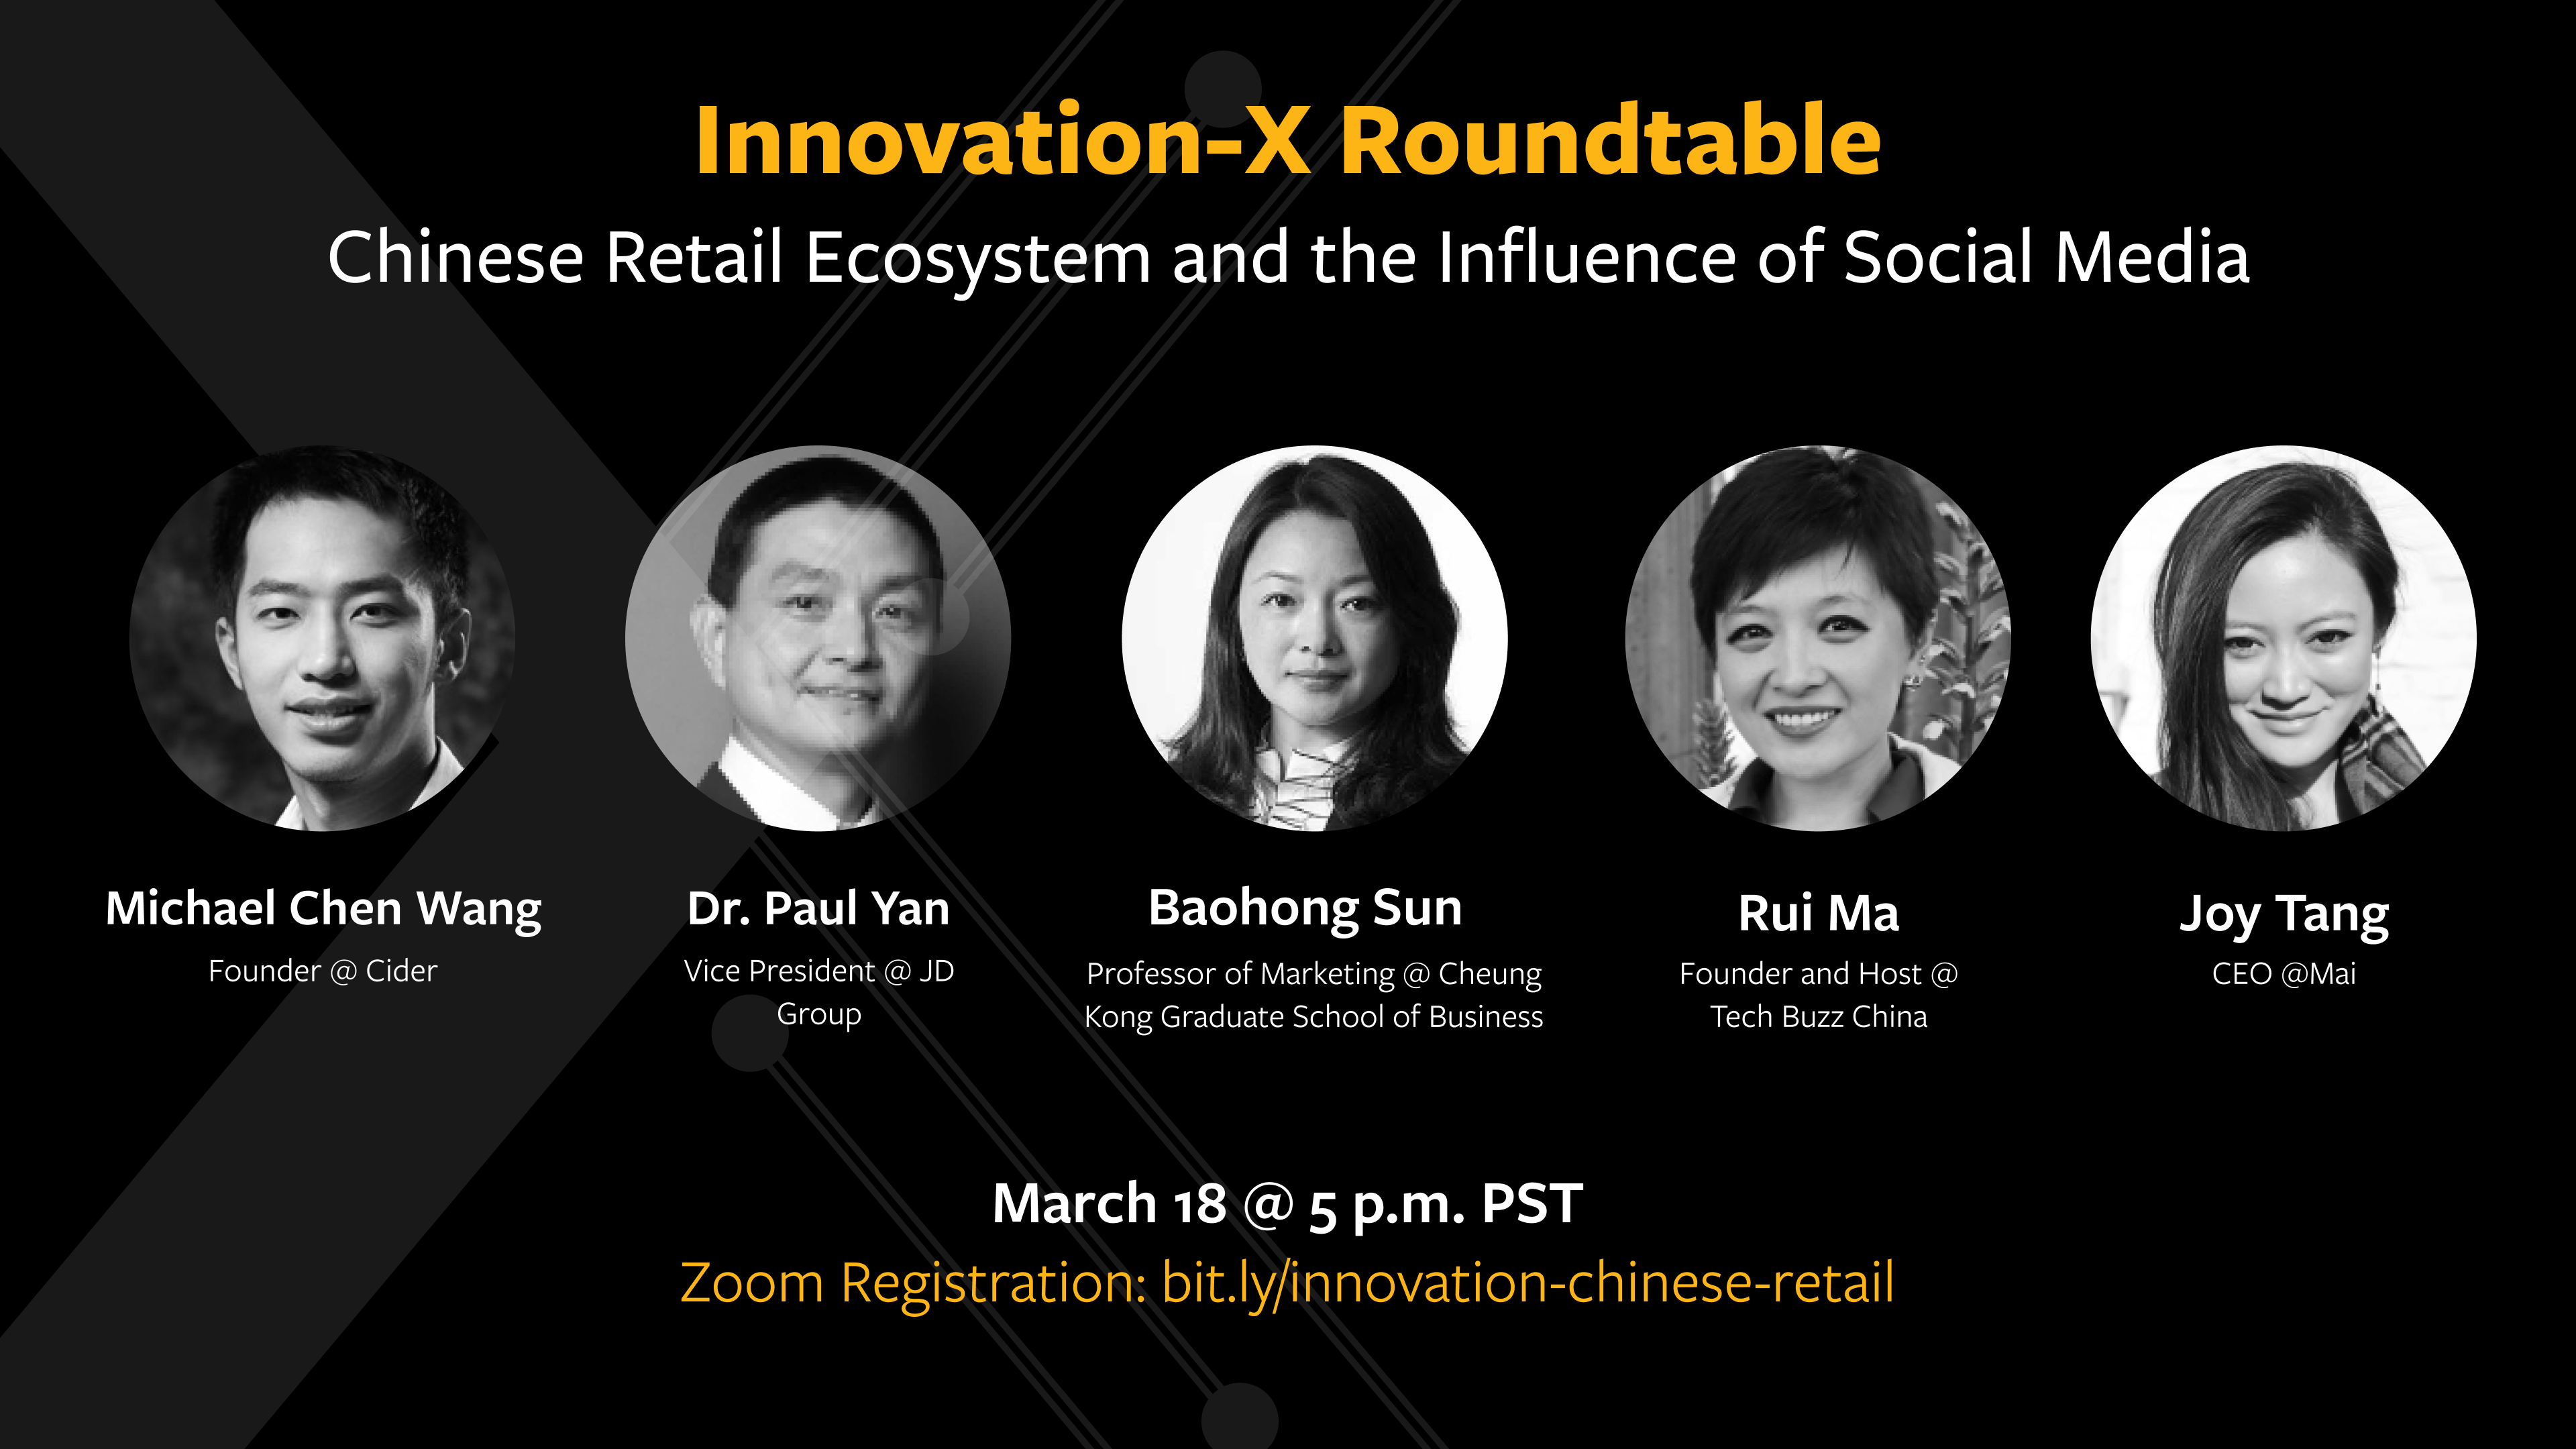 Chinese Retail Ecosystem and the Influence of Social Media